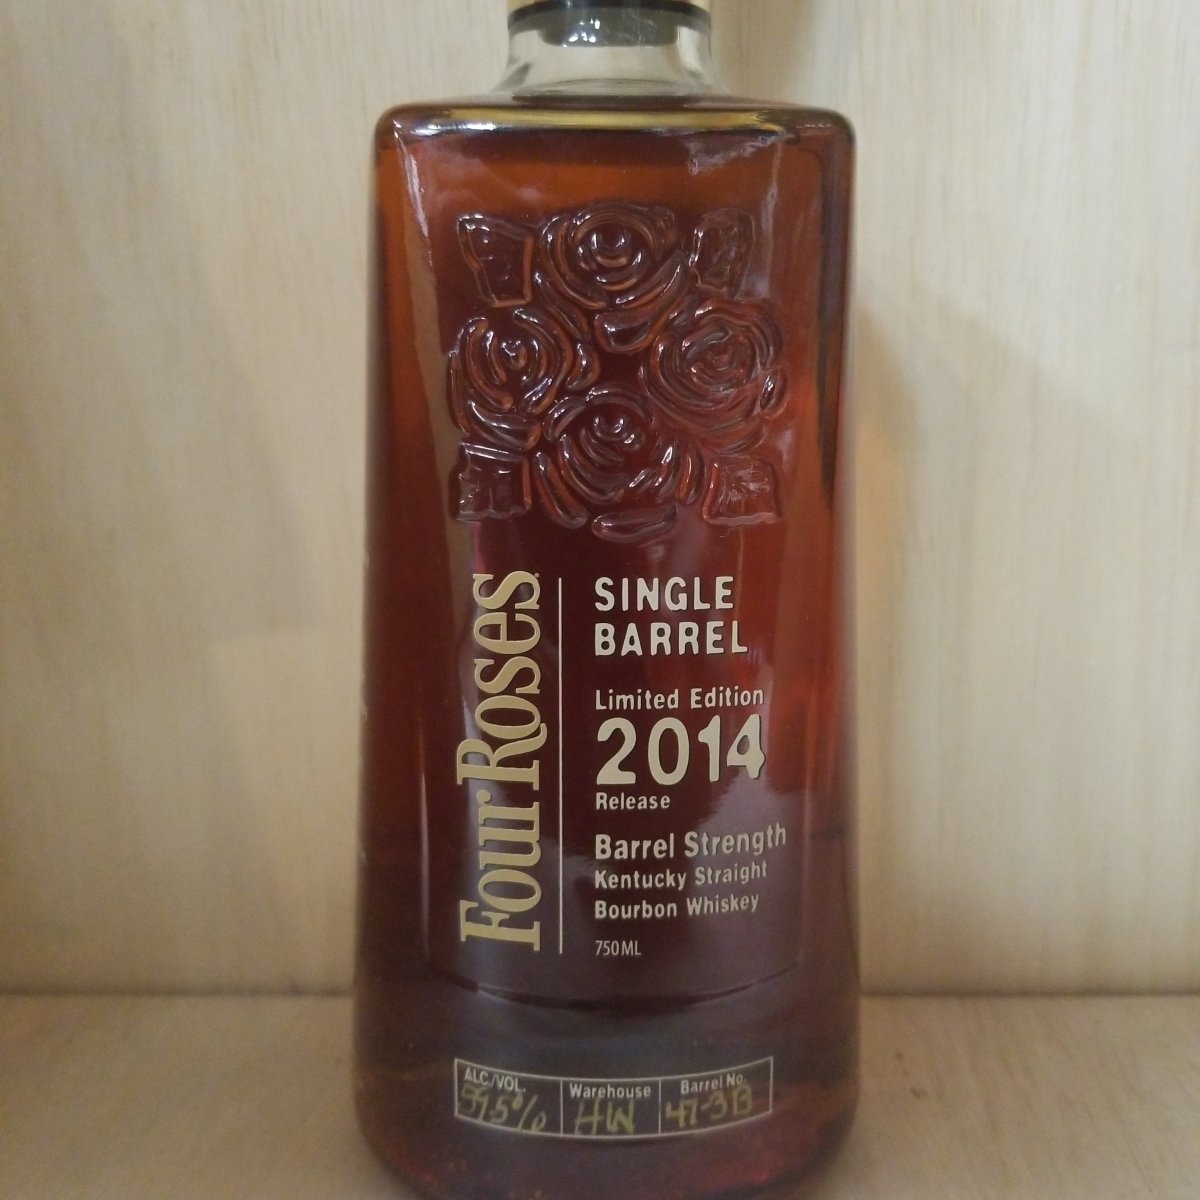 Four Roses 11 Year Old Single Barrel Bourbon 2014 Limited Edition, 750ml (OESF, proof 119) - Sip & Say